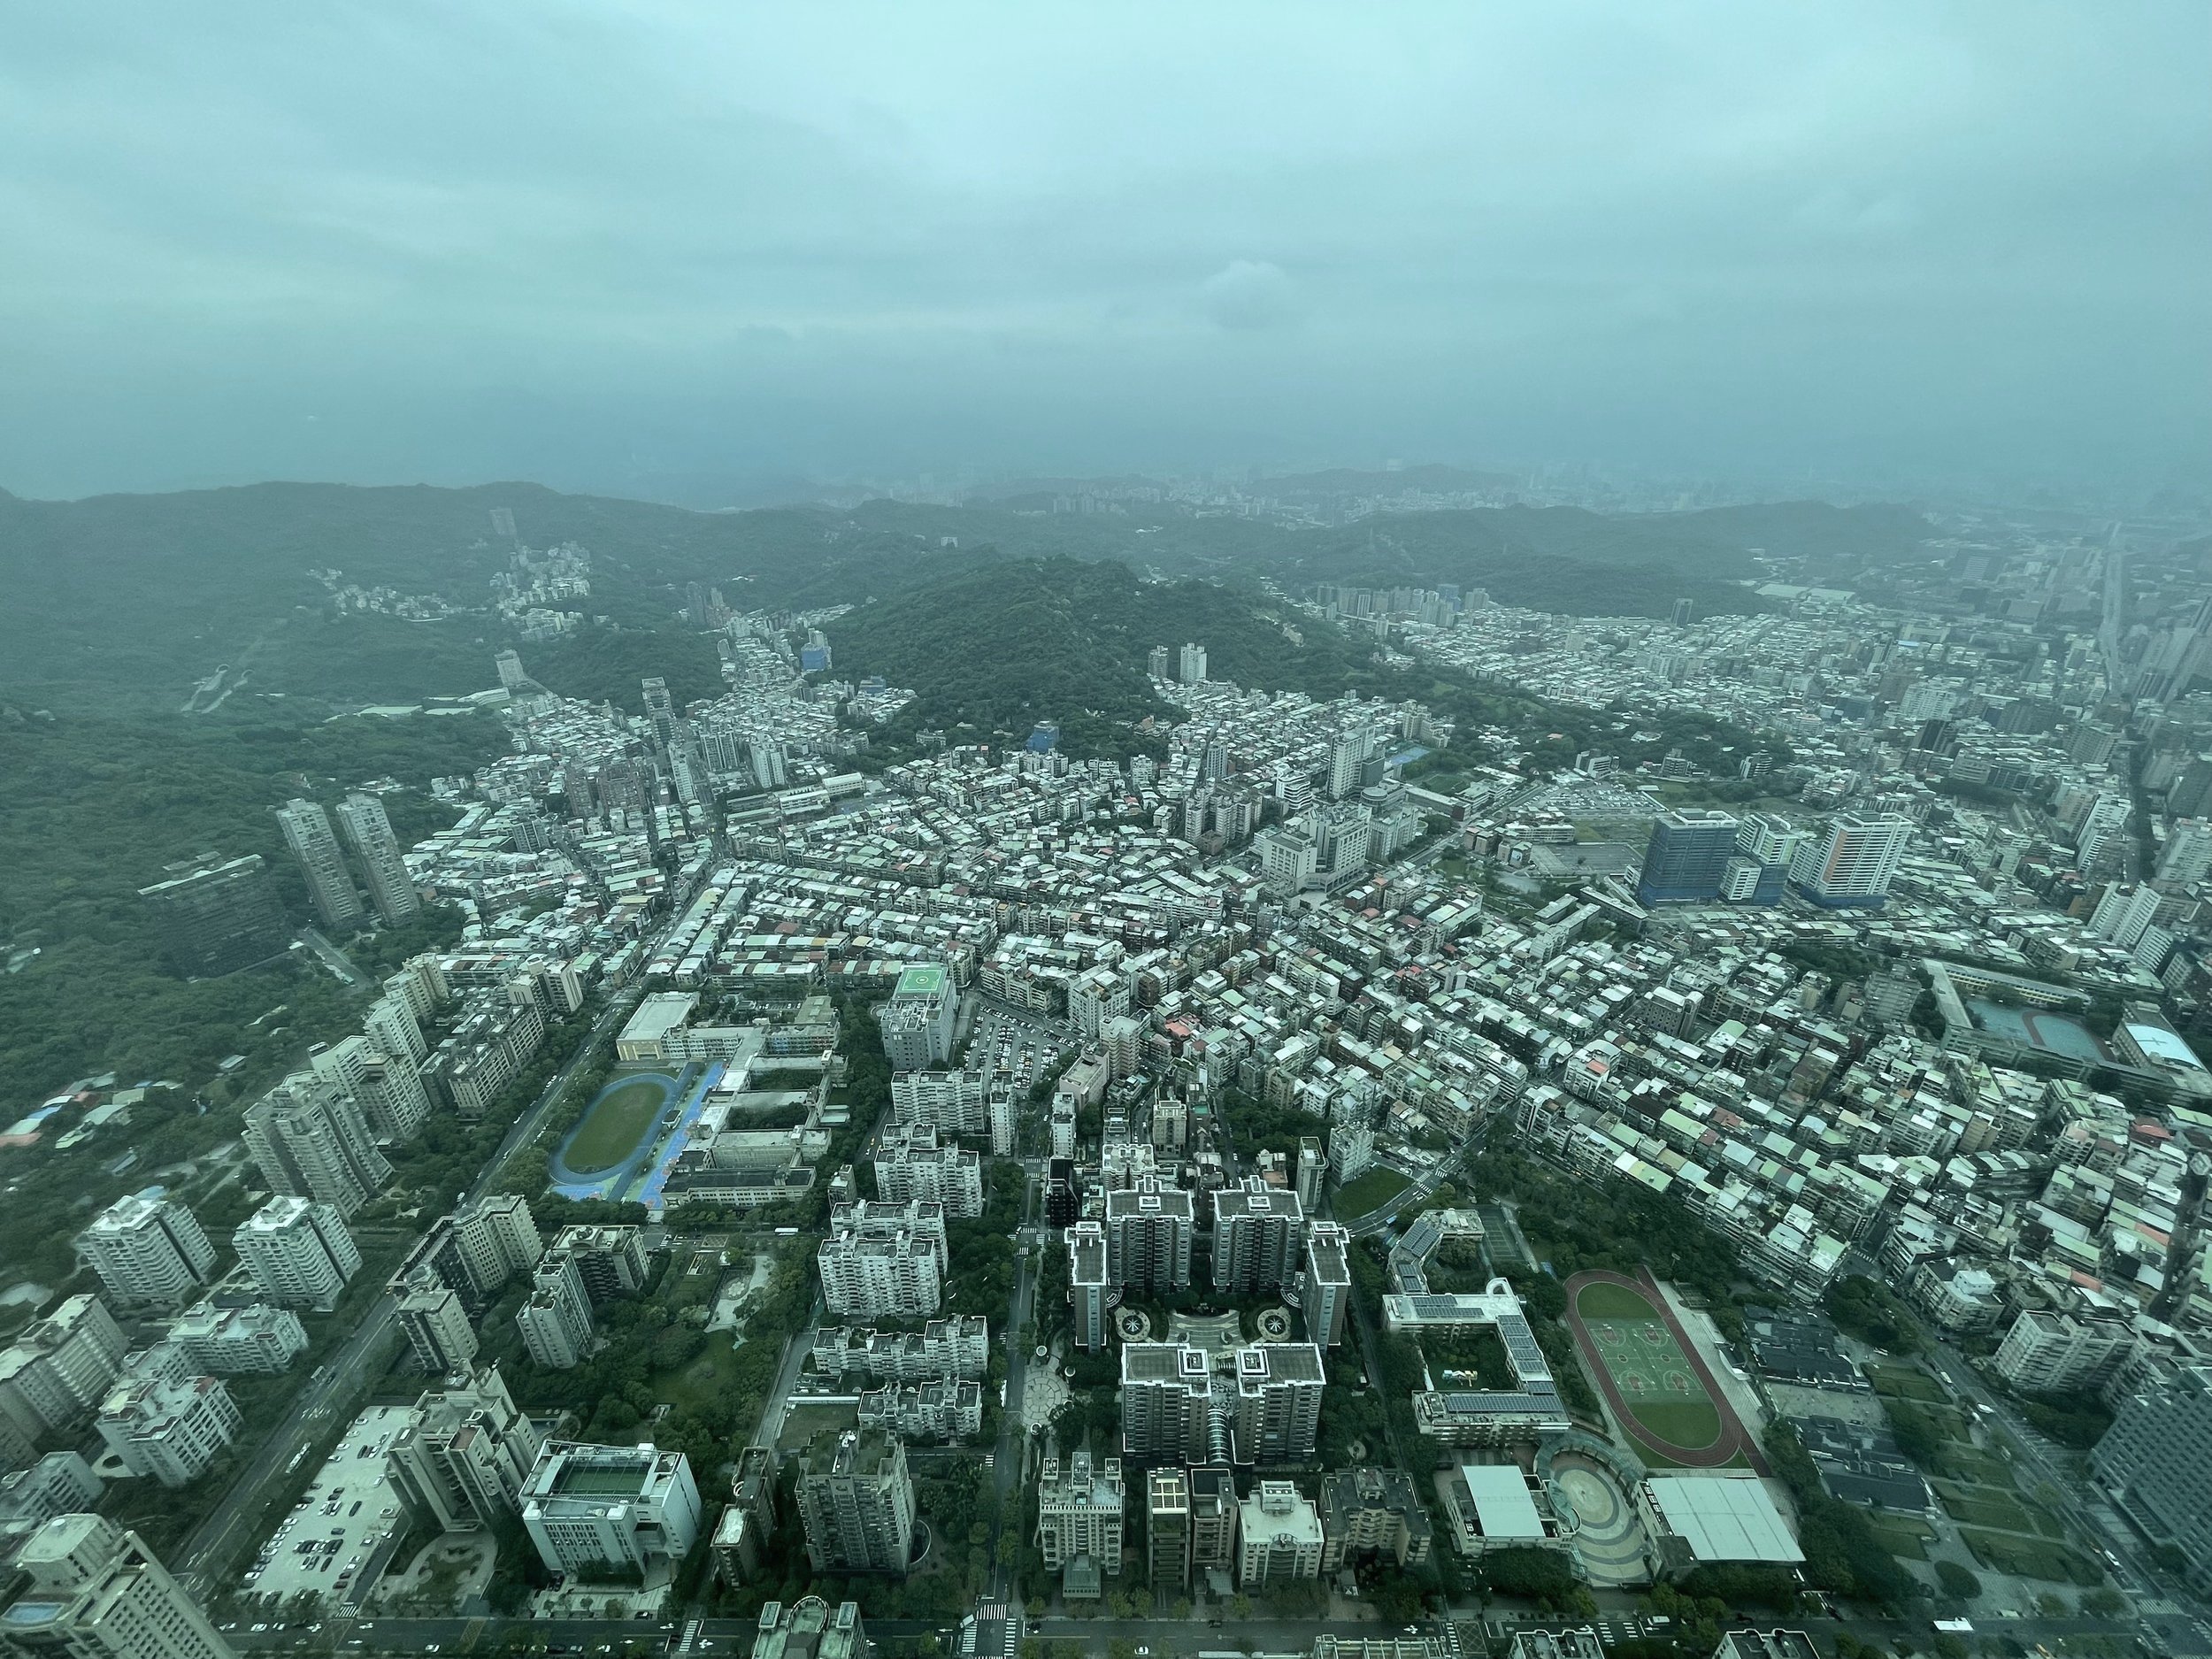 View from Taipei 101 looking South